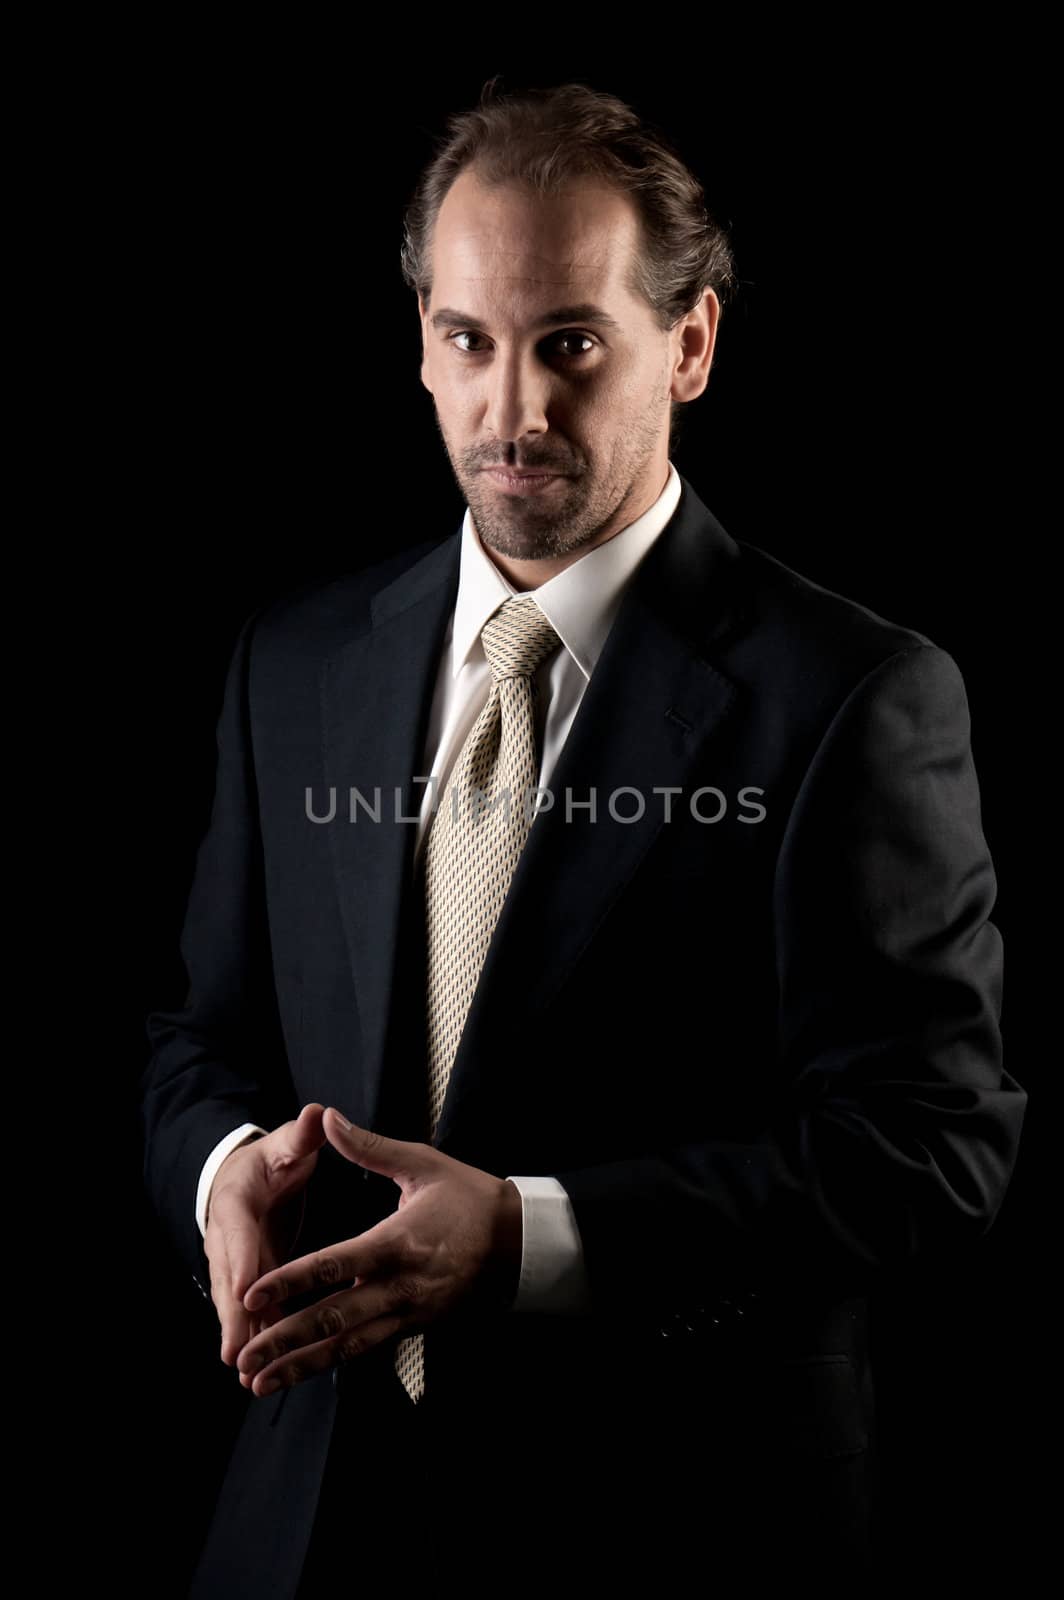 Adult businessman serious hands gesture on black background by dgmata